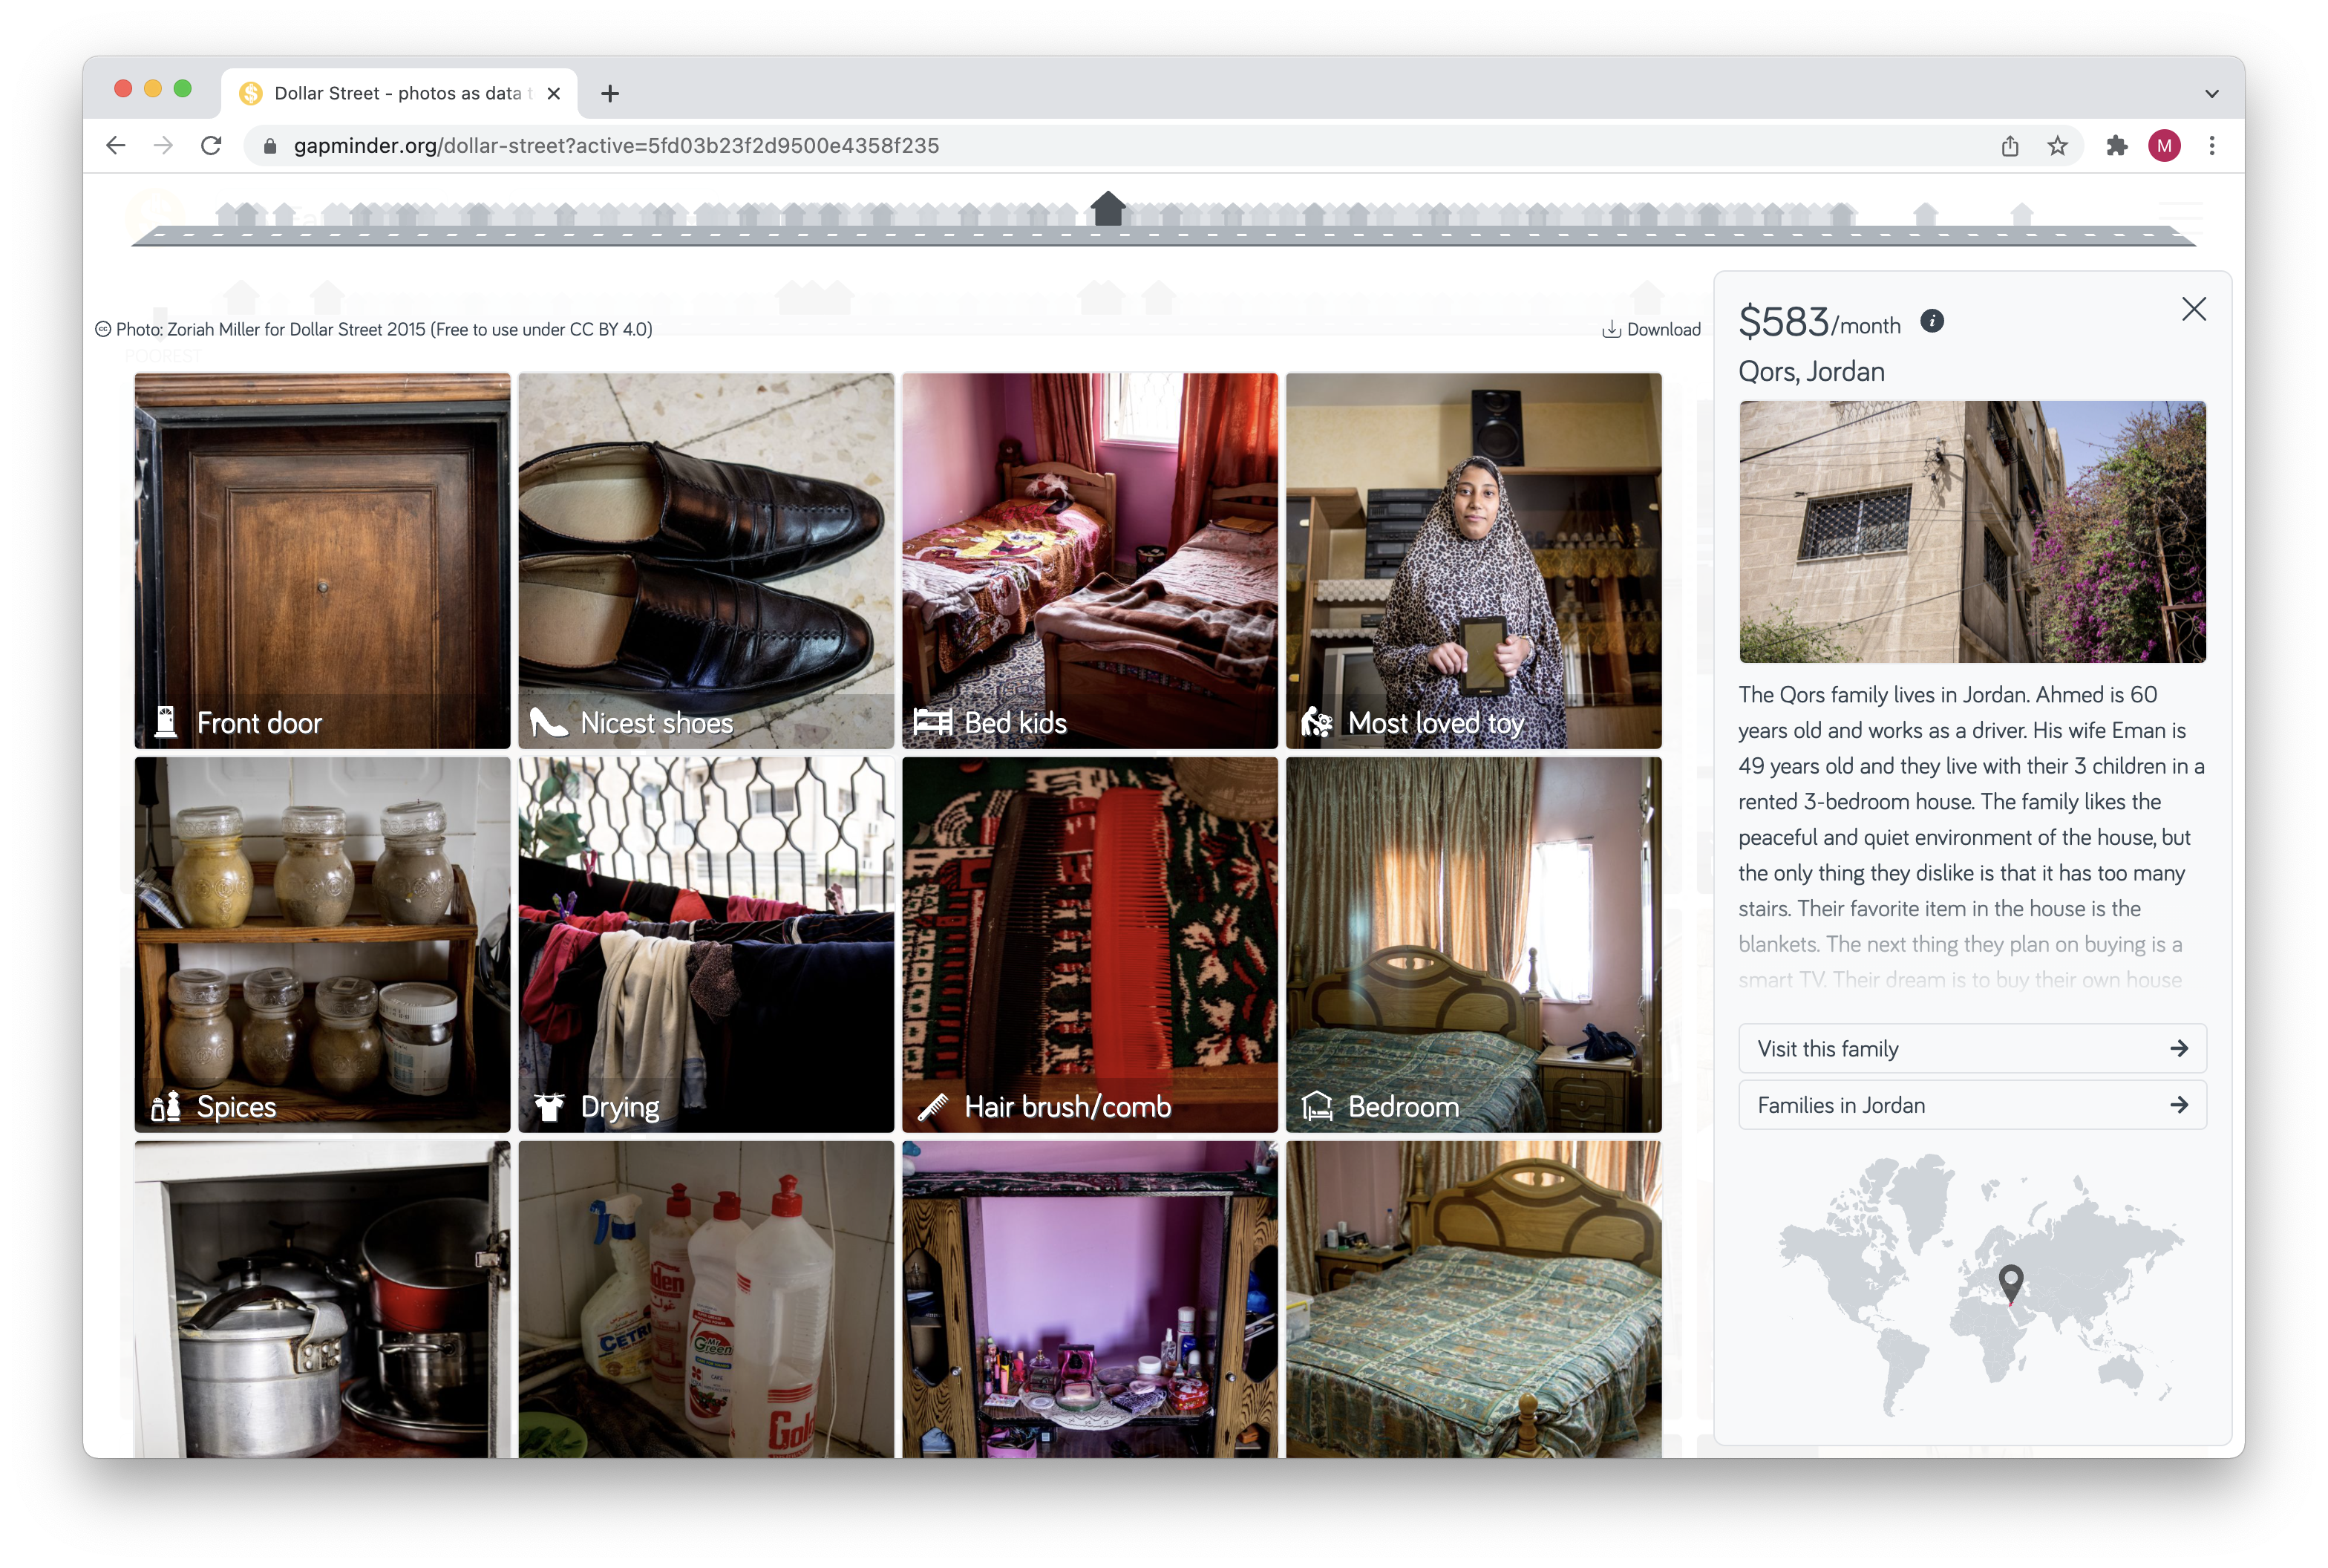 A web browser showing the pictures of the inside of the home of a family in Jordann